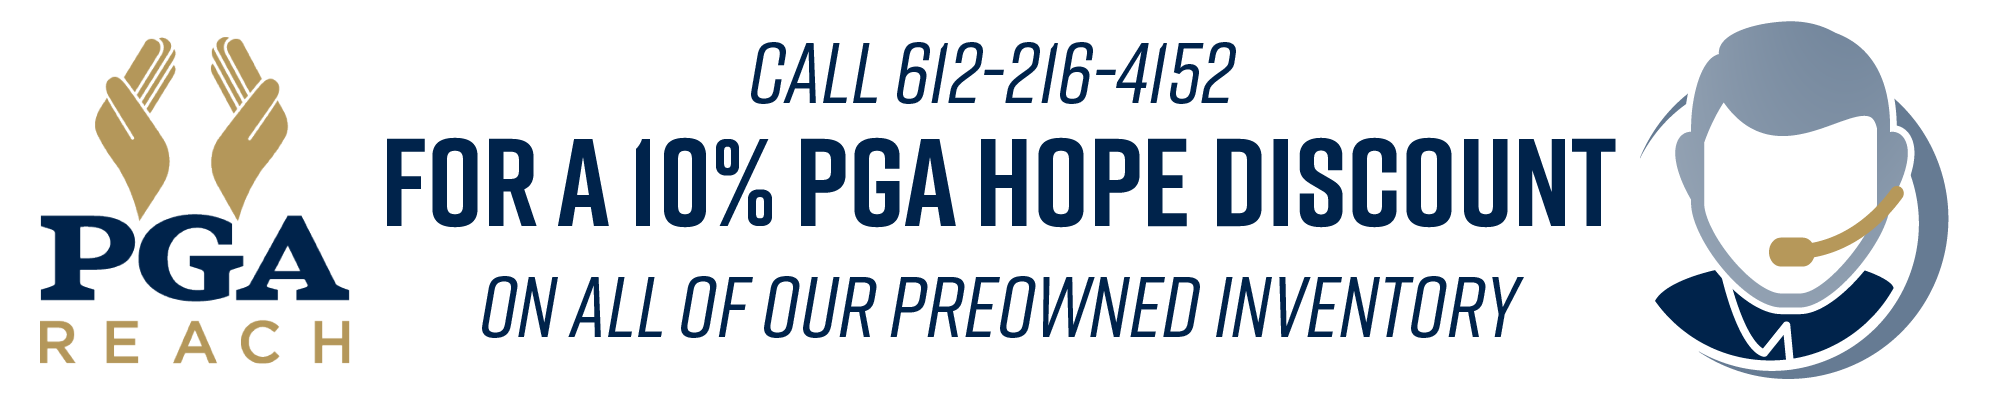 PGA Reach | Call 612-216-4152 | For A 10% PGA Hope Discount On All Of Our Preowned Inventory